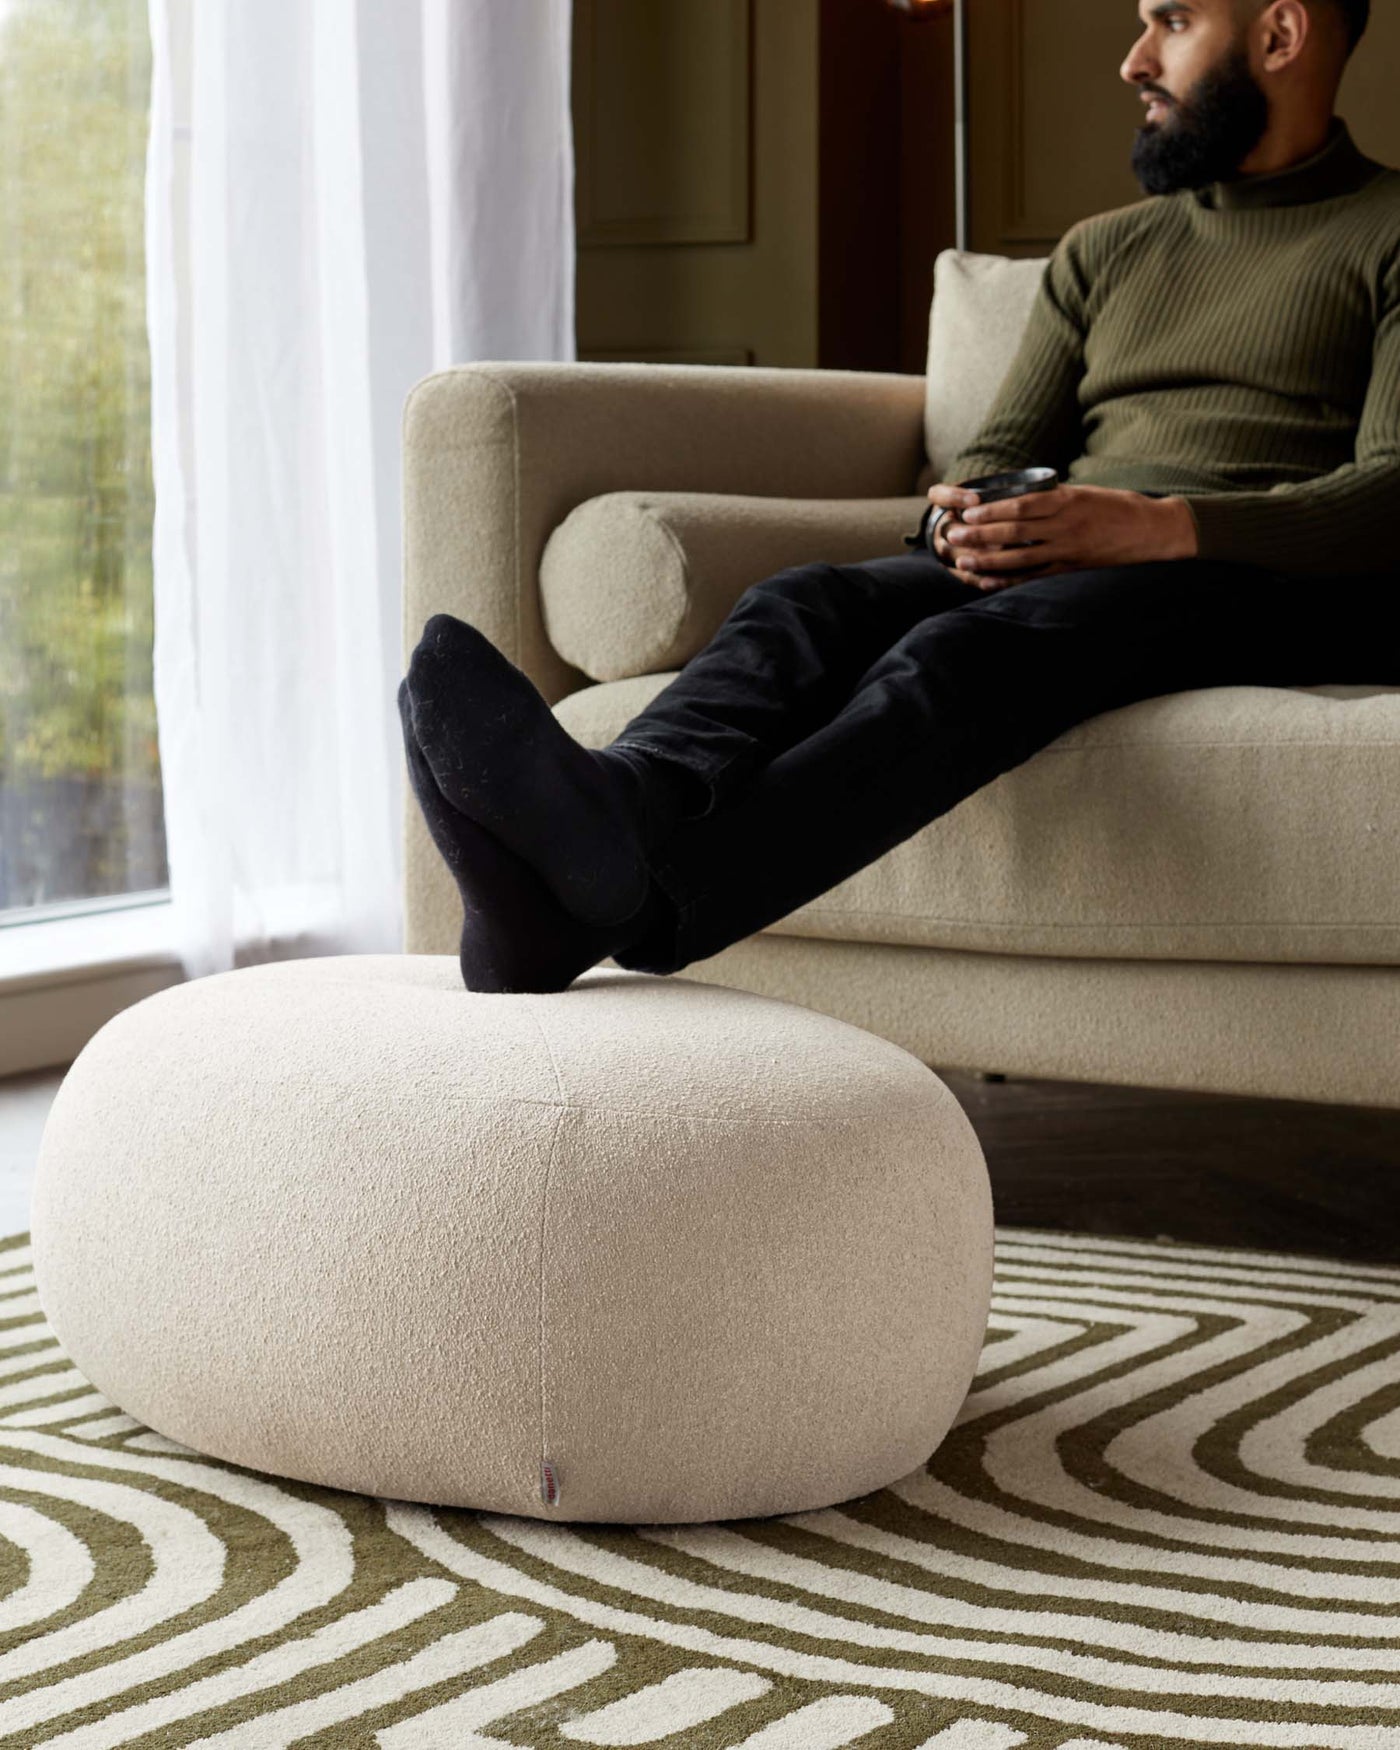 Beige upholstered sofa with a matching plump round ottoman on a patterned area rug.